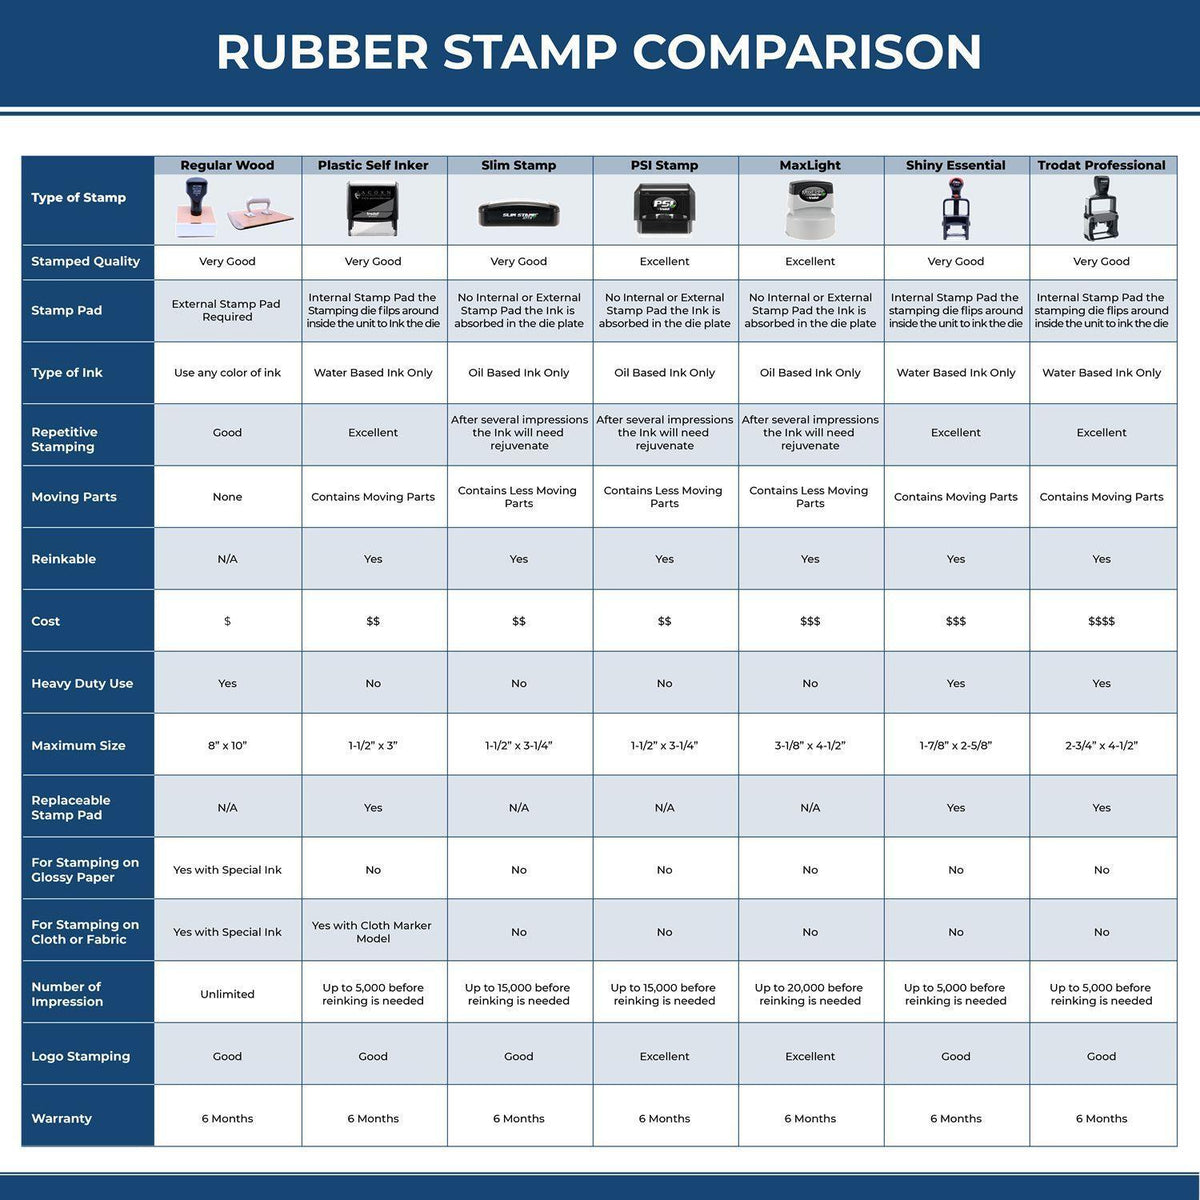 Large Pre-Inked Dated Material Open Immediately Stamp 5632SLIM Rubber Stamp Comparison